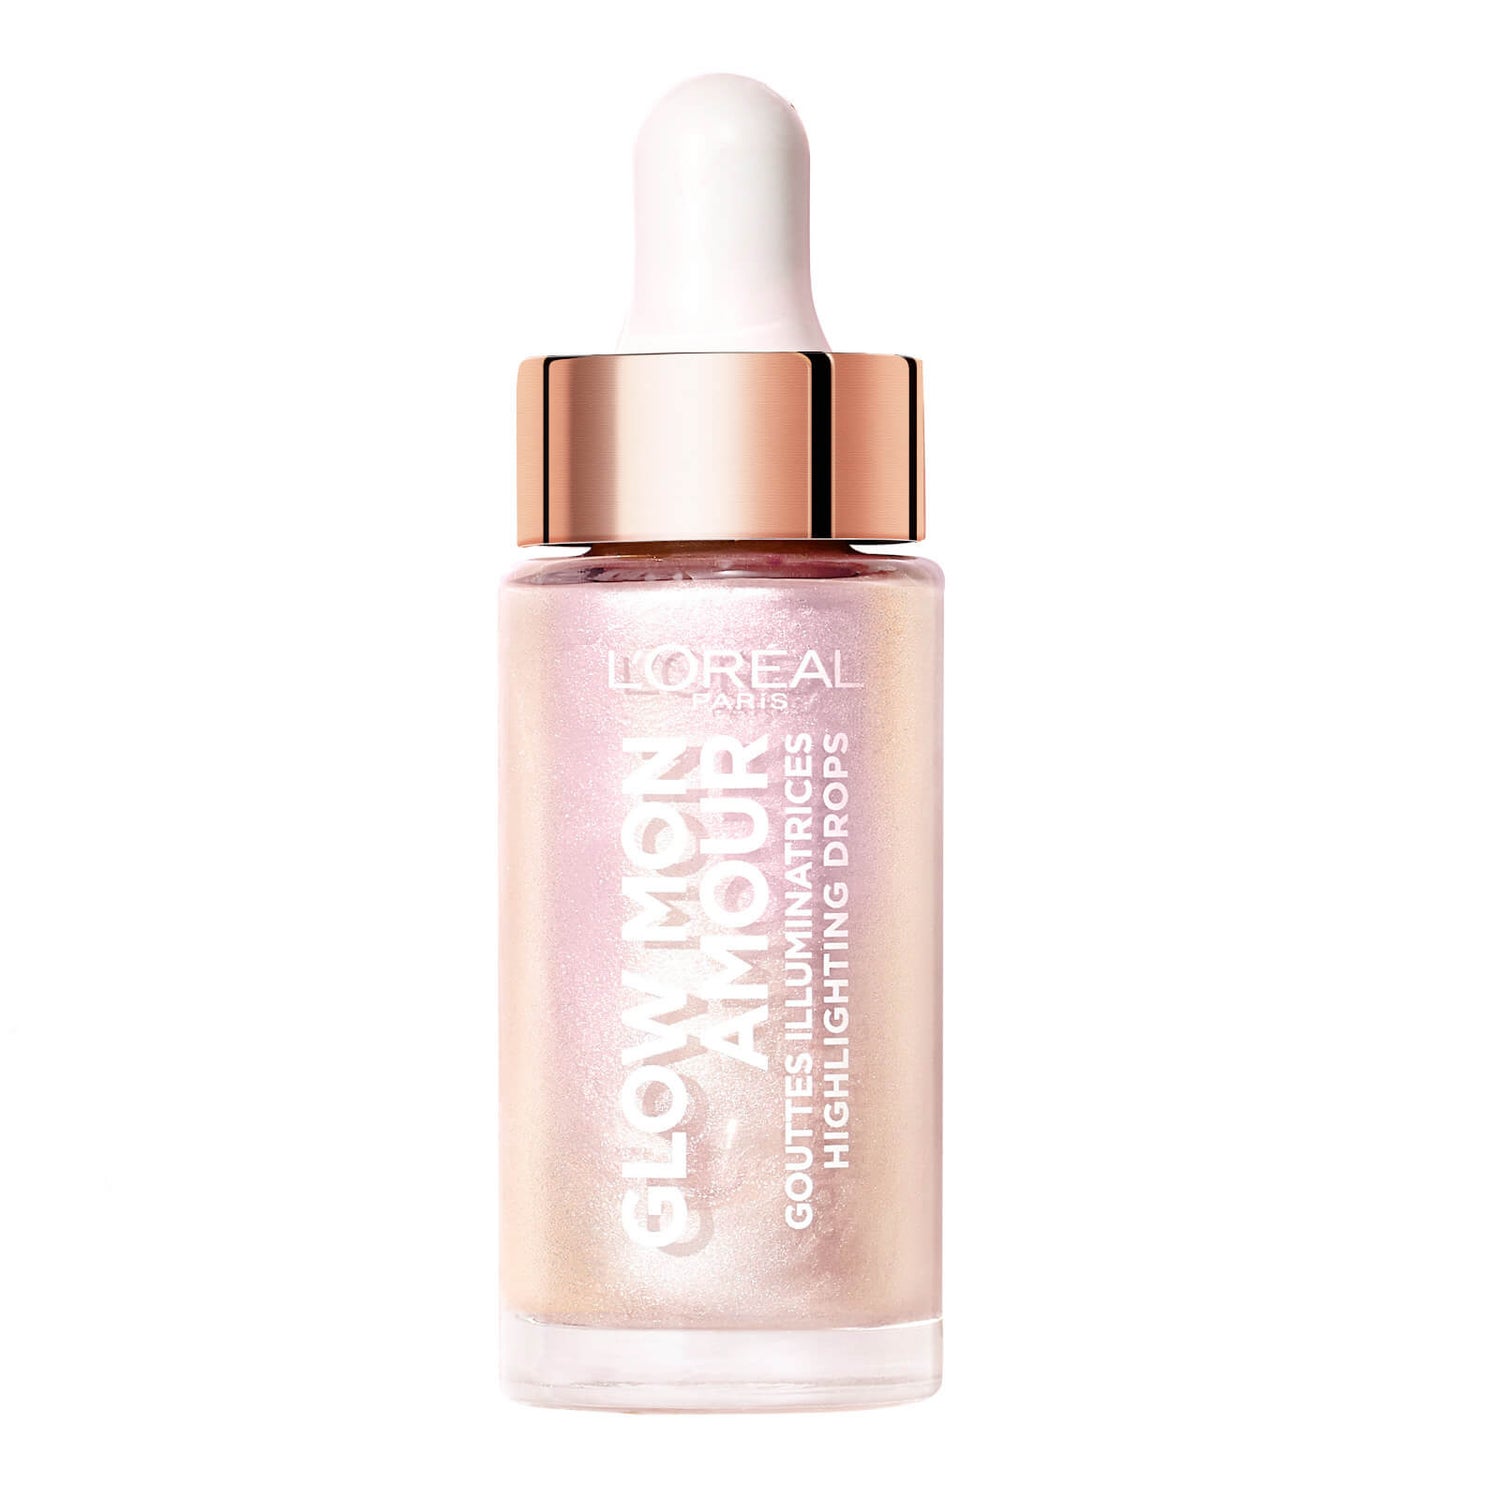 L'Oréal Paris Glow Mon Amour Highlight Drops Infused with Coconut Oil